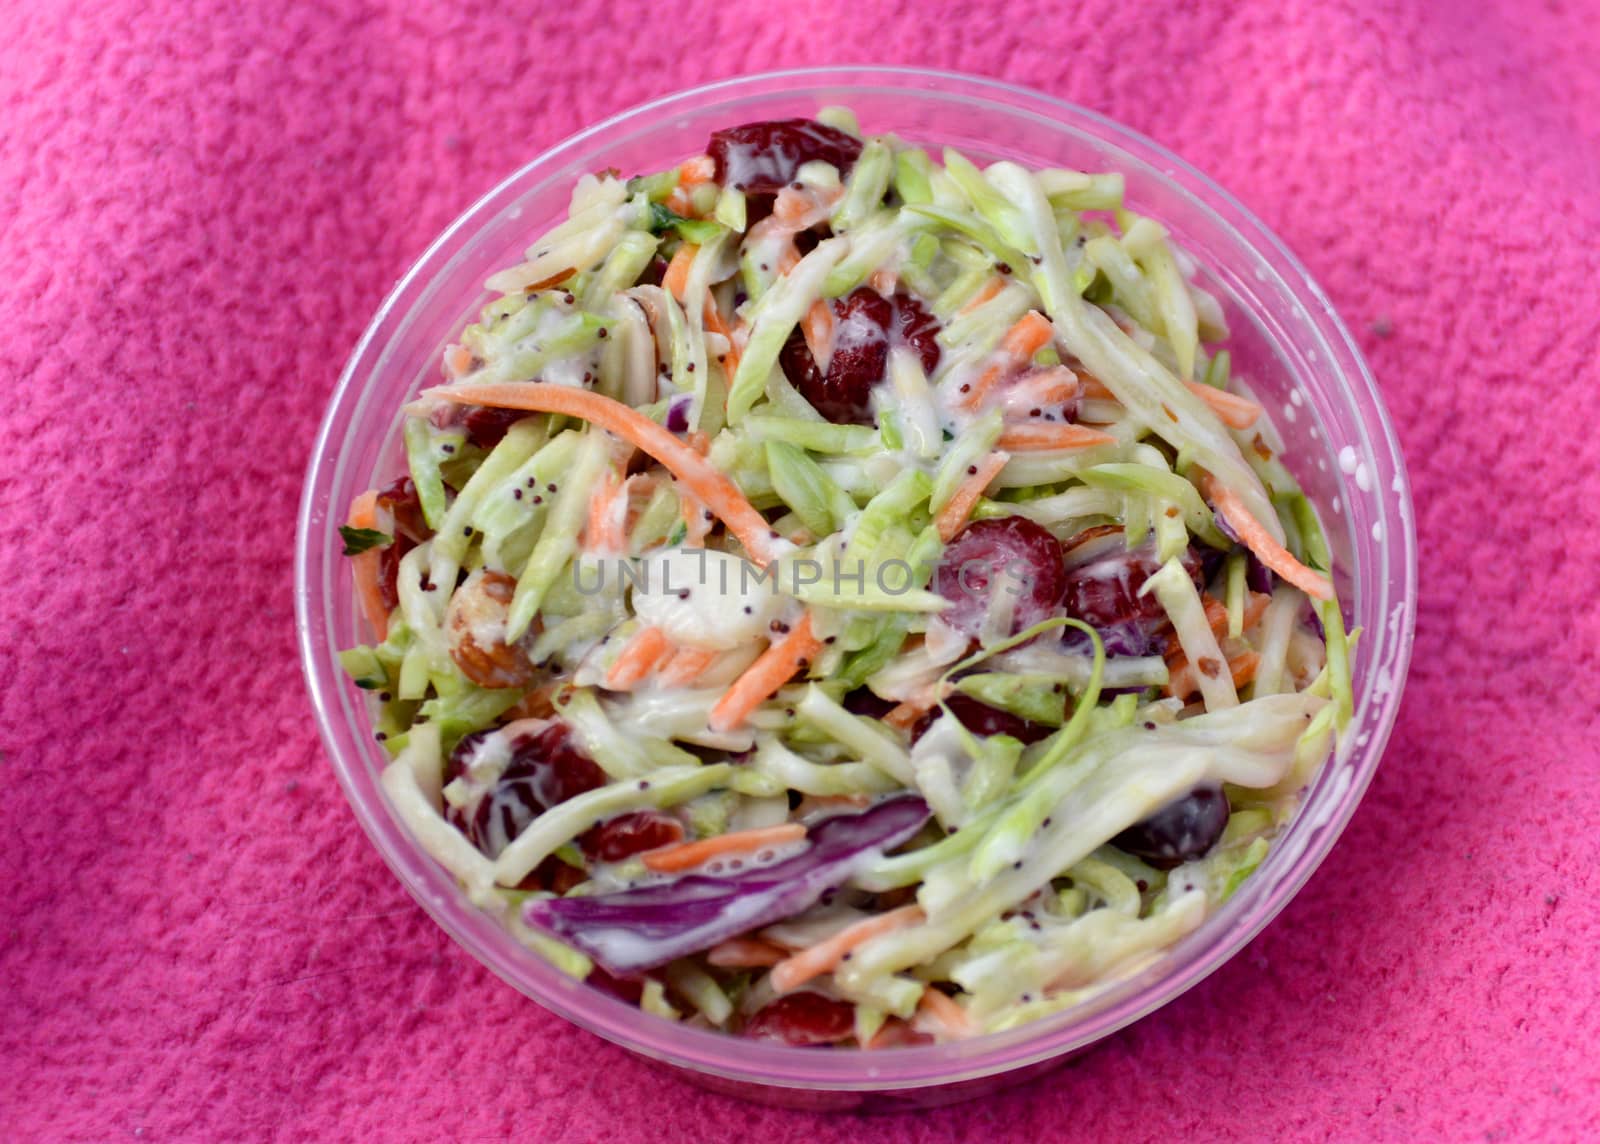 close-up with coleslaw by ftlaudgirl